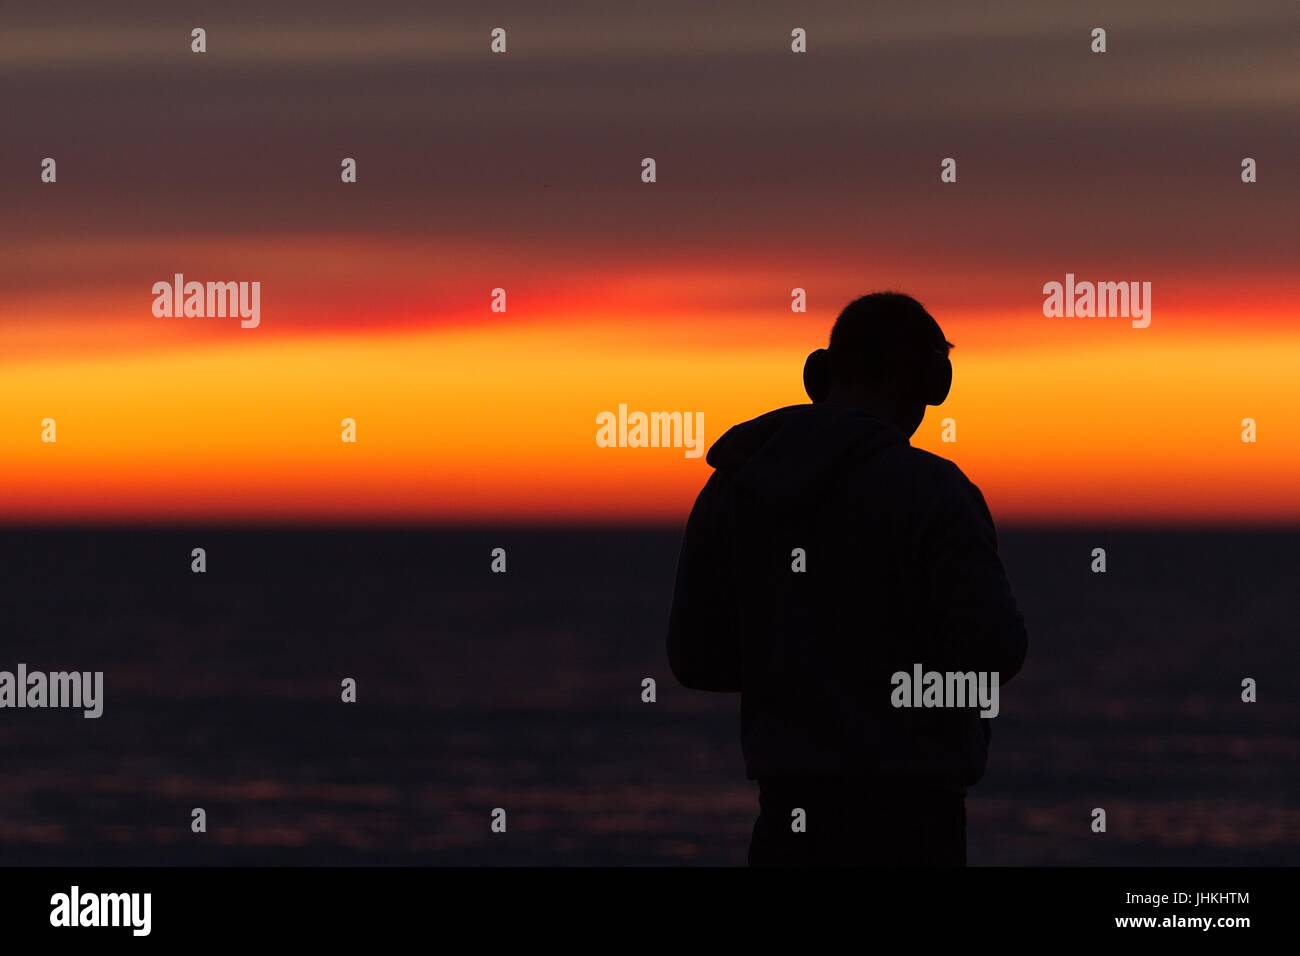 Silhouette of the man in the headset / headphones / earphones during sunset at the seaside Stock Photo